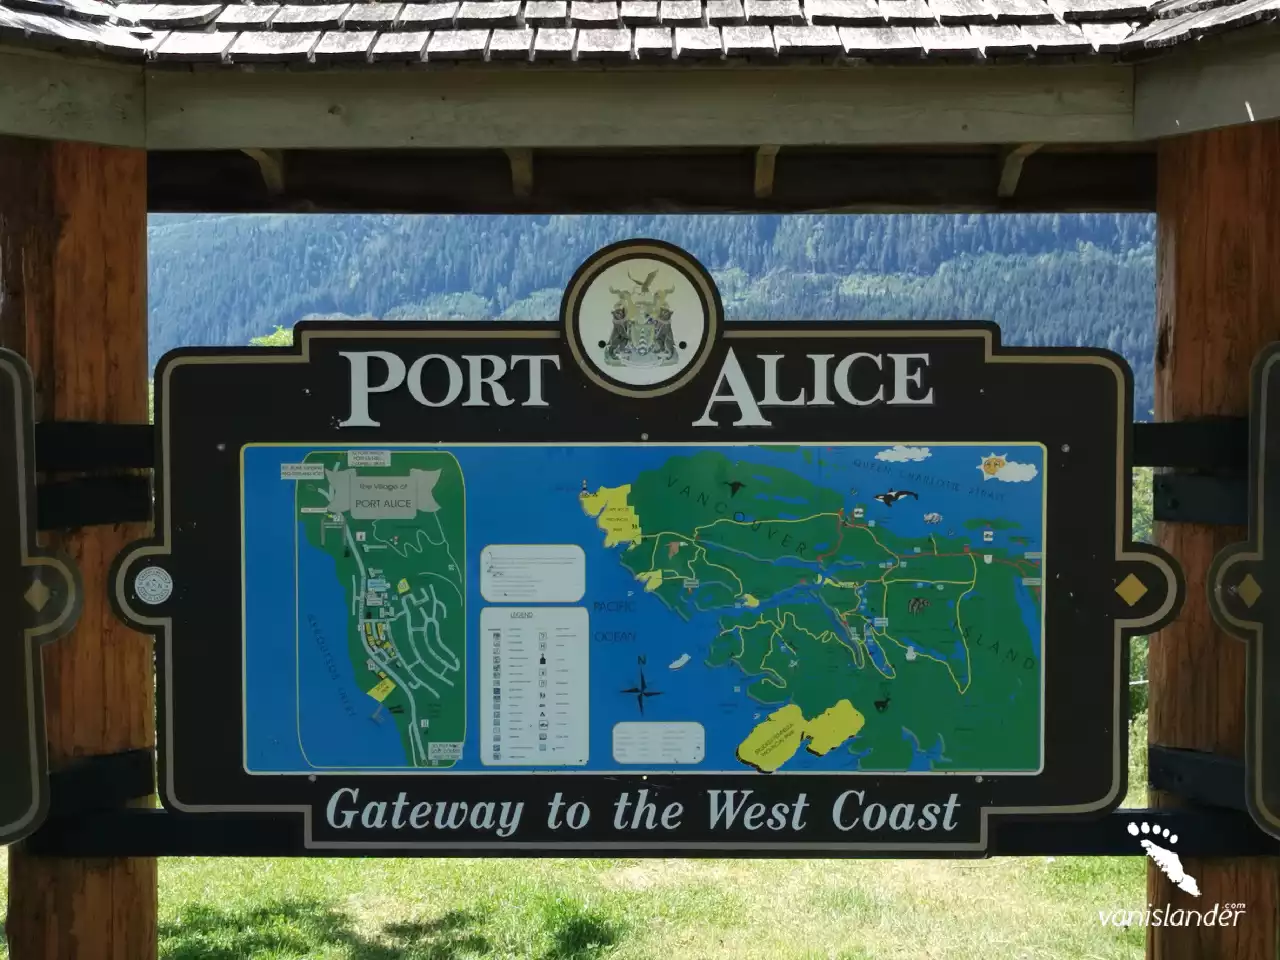 Port Alice - A Gateway to the West Coast, Vancouver Island